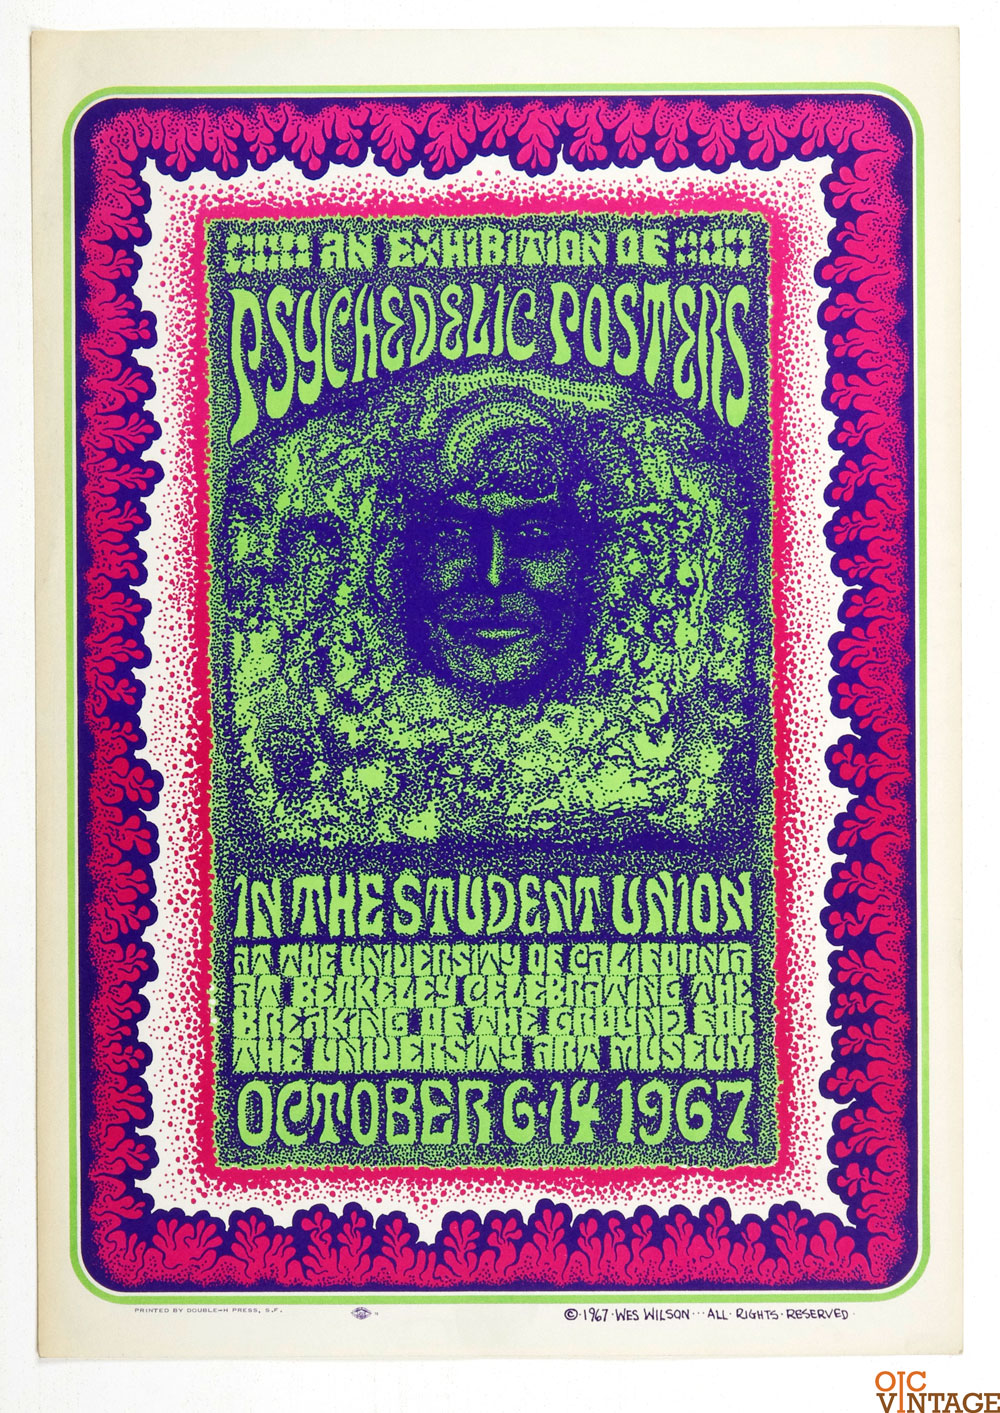 Wes Wilson Poster 1967 Psychedelic Poster Show